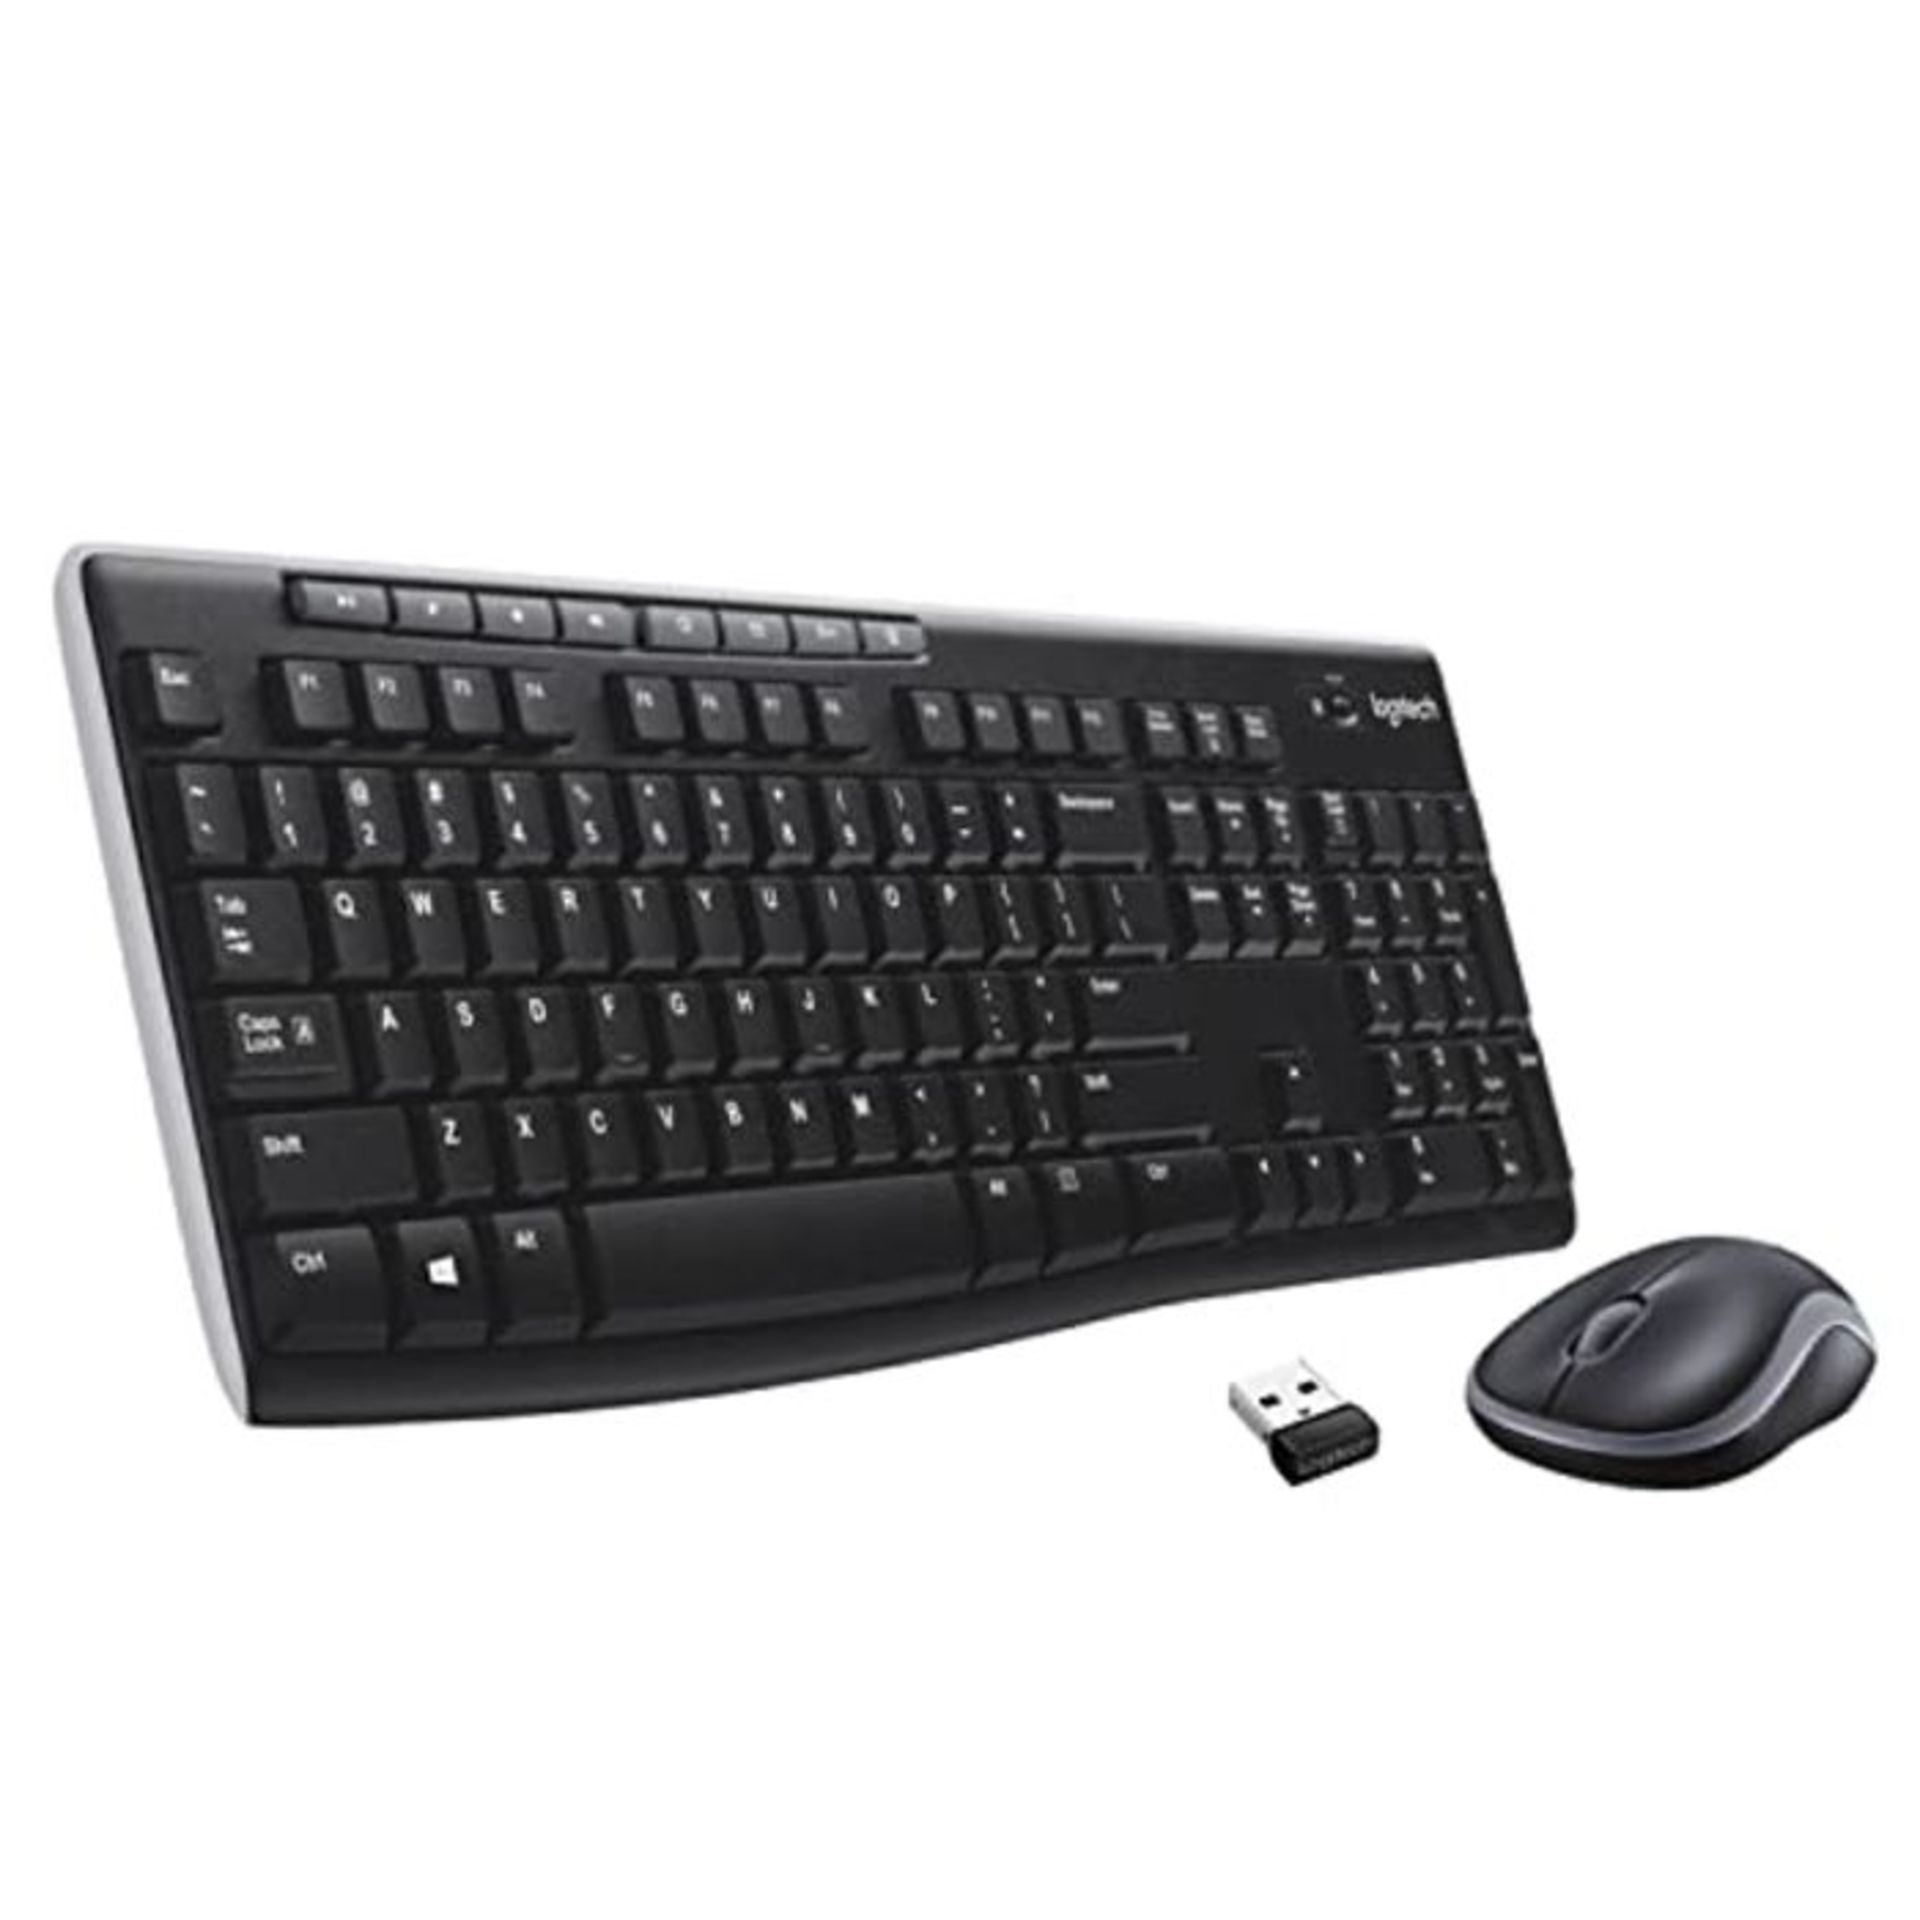 [INCOMPLETE] Logitech MK270 Wireless Keyboard and Mouse Combo for Windows, 2.4 GHz Wir